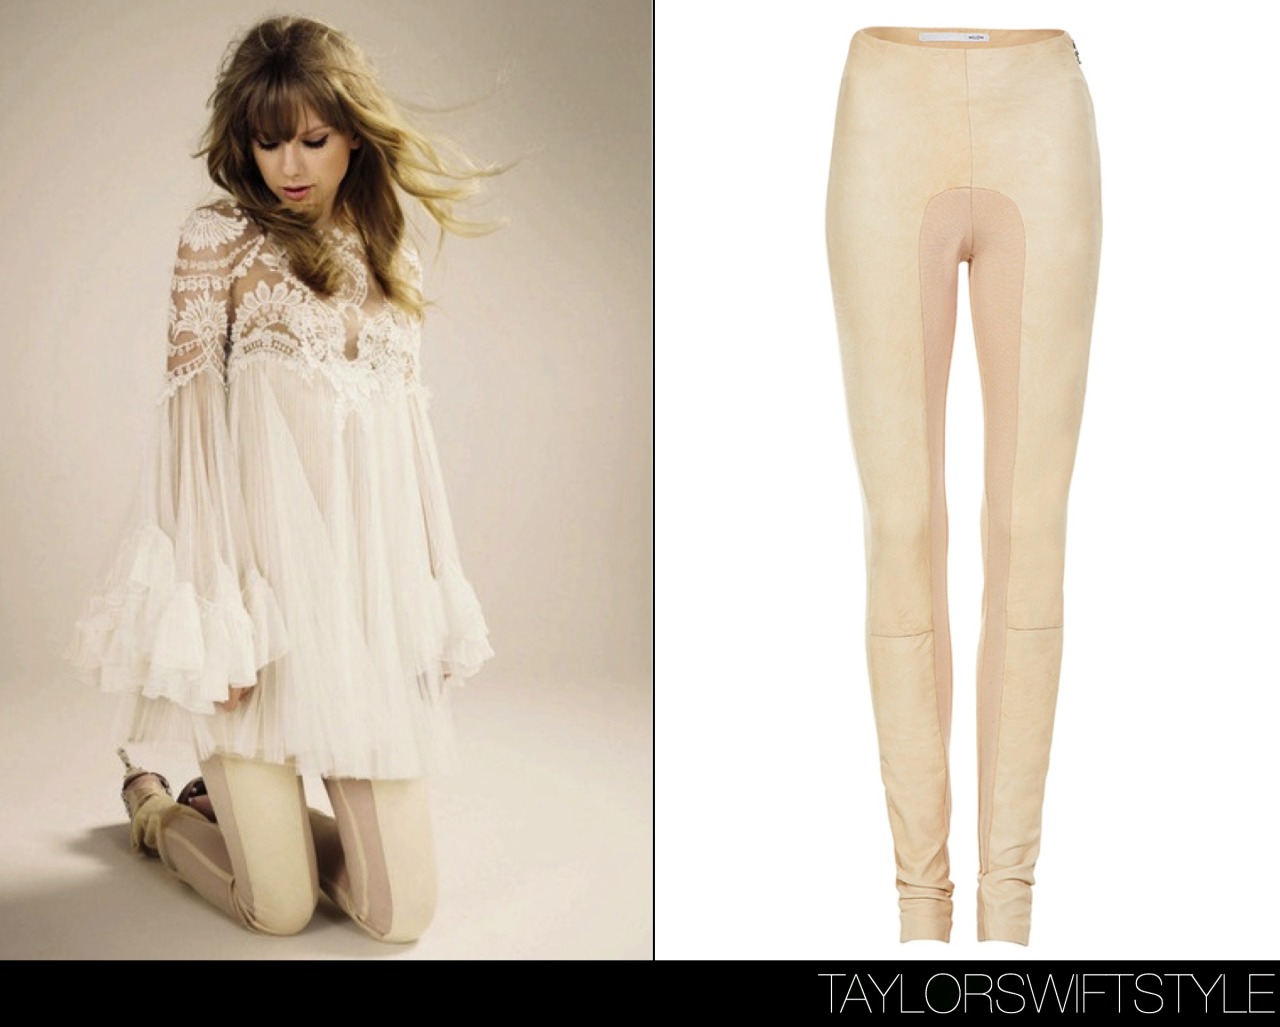 In a photo spread for InStyle U.K. | April 2013Willow &#8216;Crushed Lambskin Panel Pant&#8217; - $695.00Worn with: Marchesa dressCheck out the rest of Taylor&#8217;s InStyle U.K. spread here